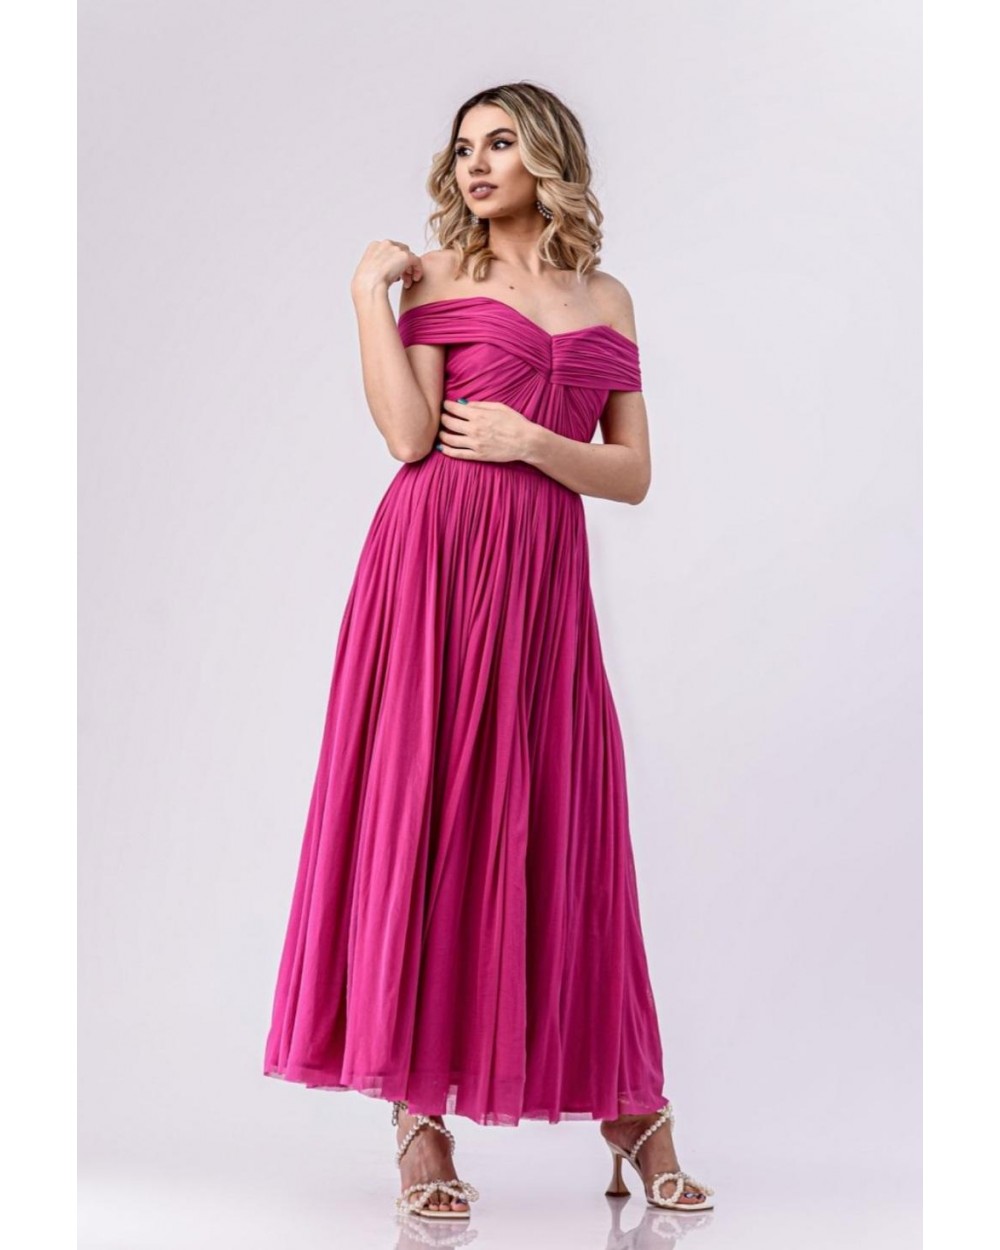 More than anything Apparently commitment ROCHIE MIDI DE OCAZIE DIN TULLE PLISAT CORALIA